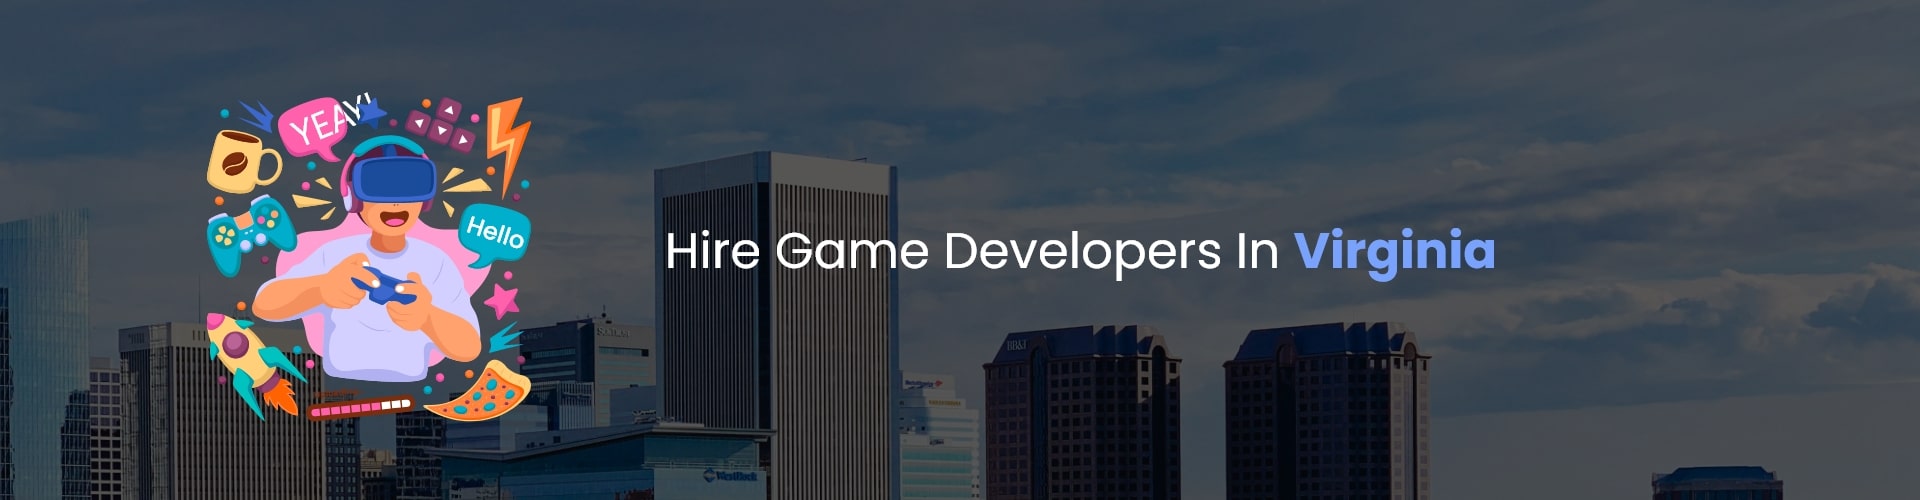 hire game developers in virginia